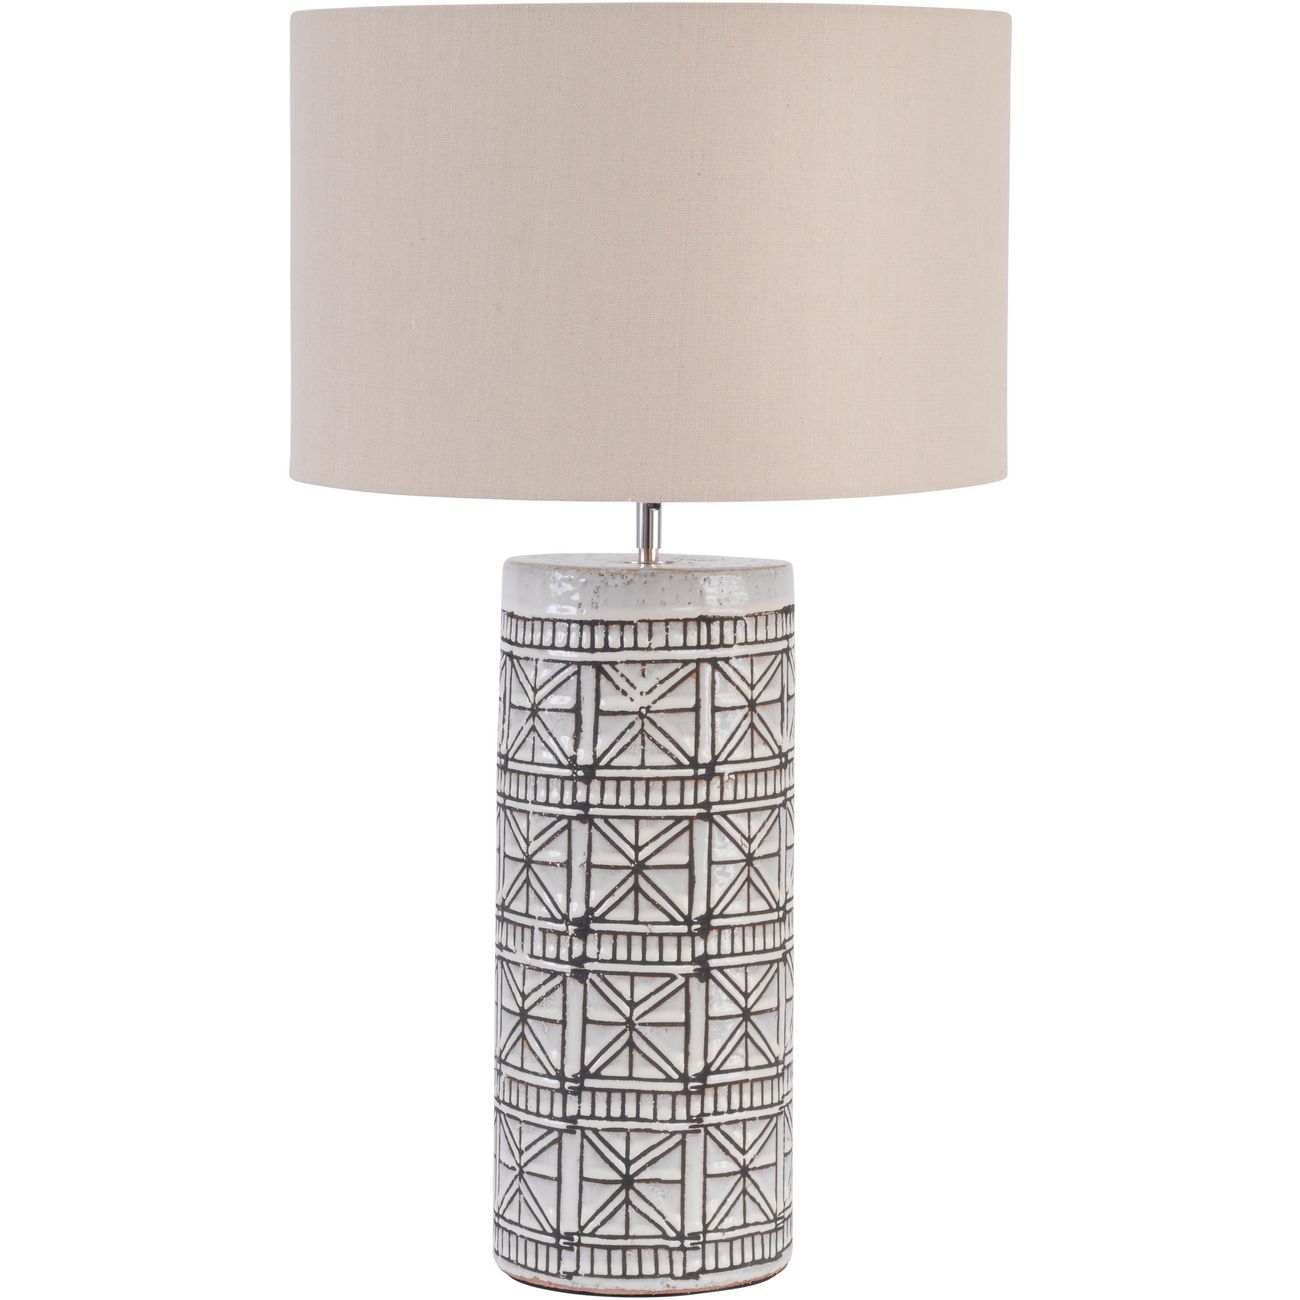 Porcelain Table Lamp with Shade